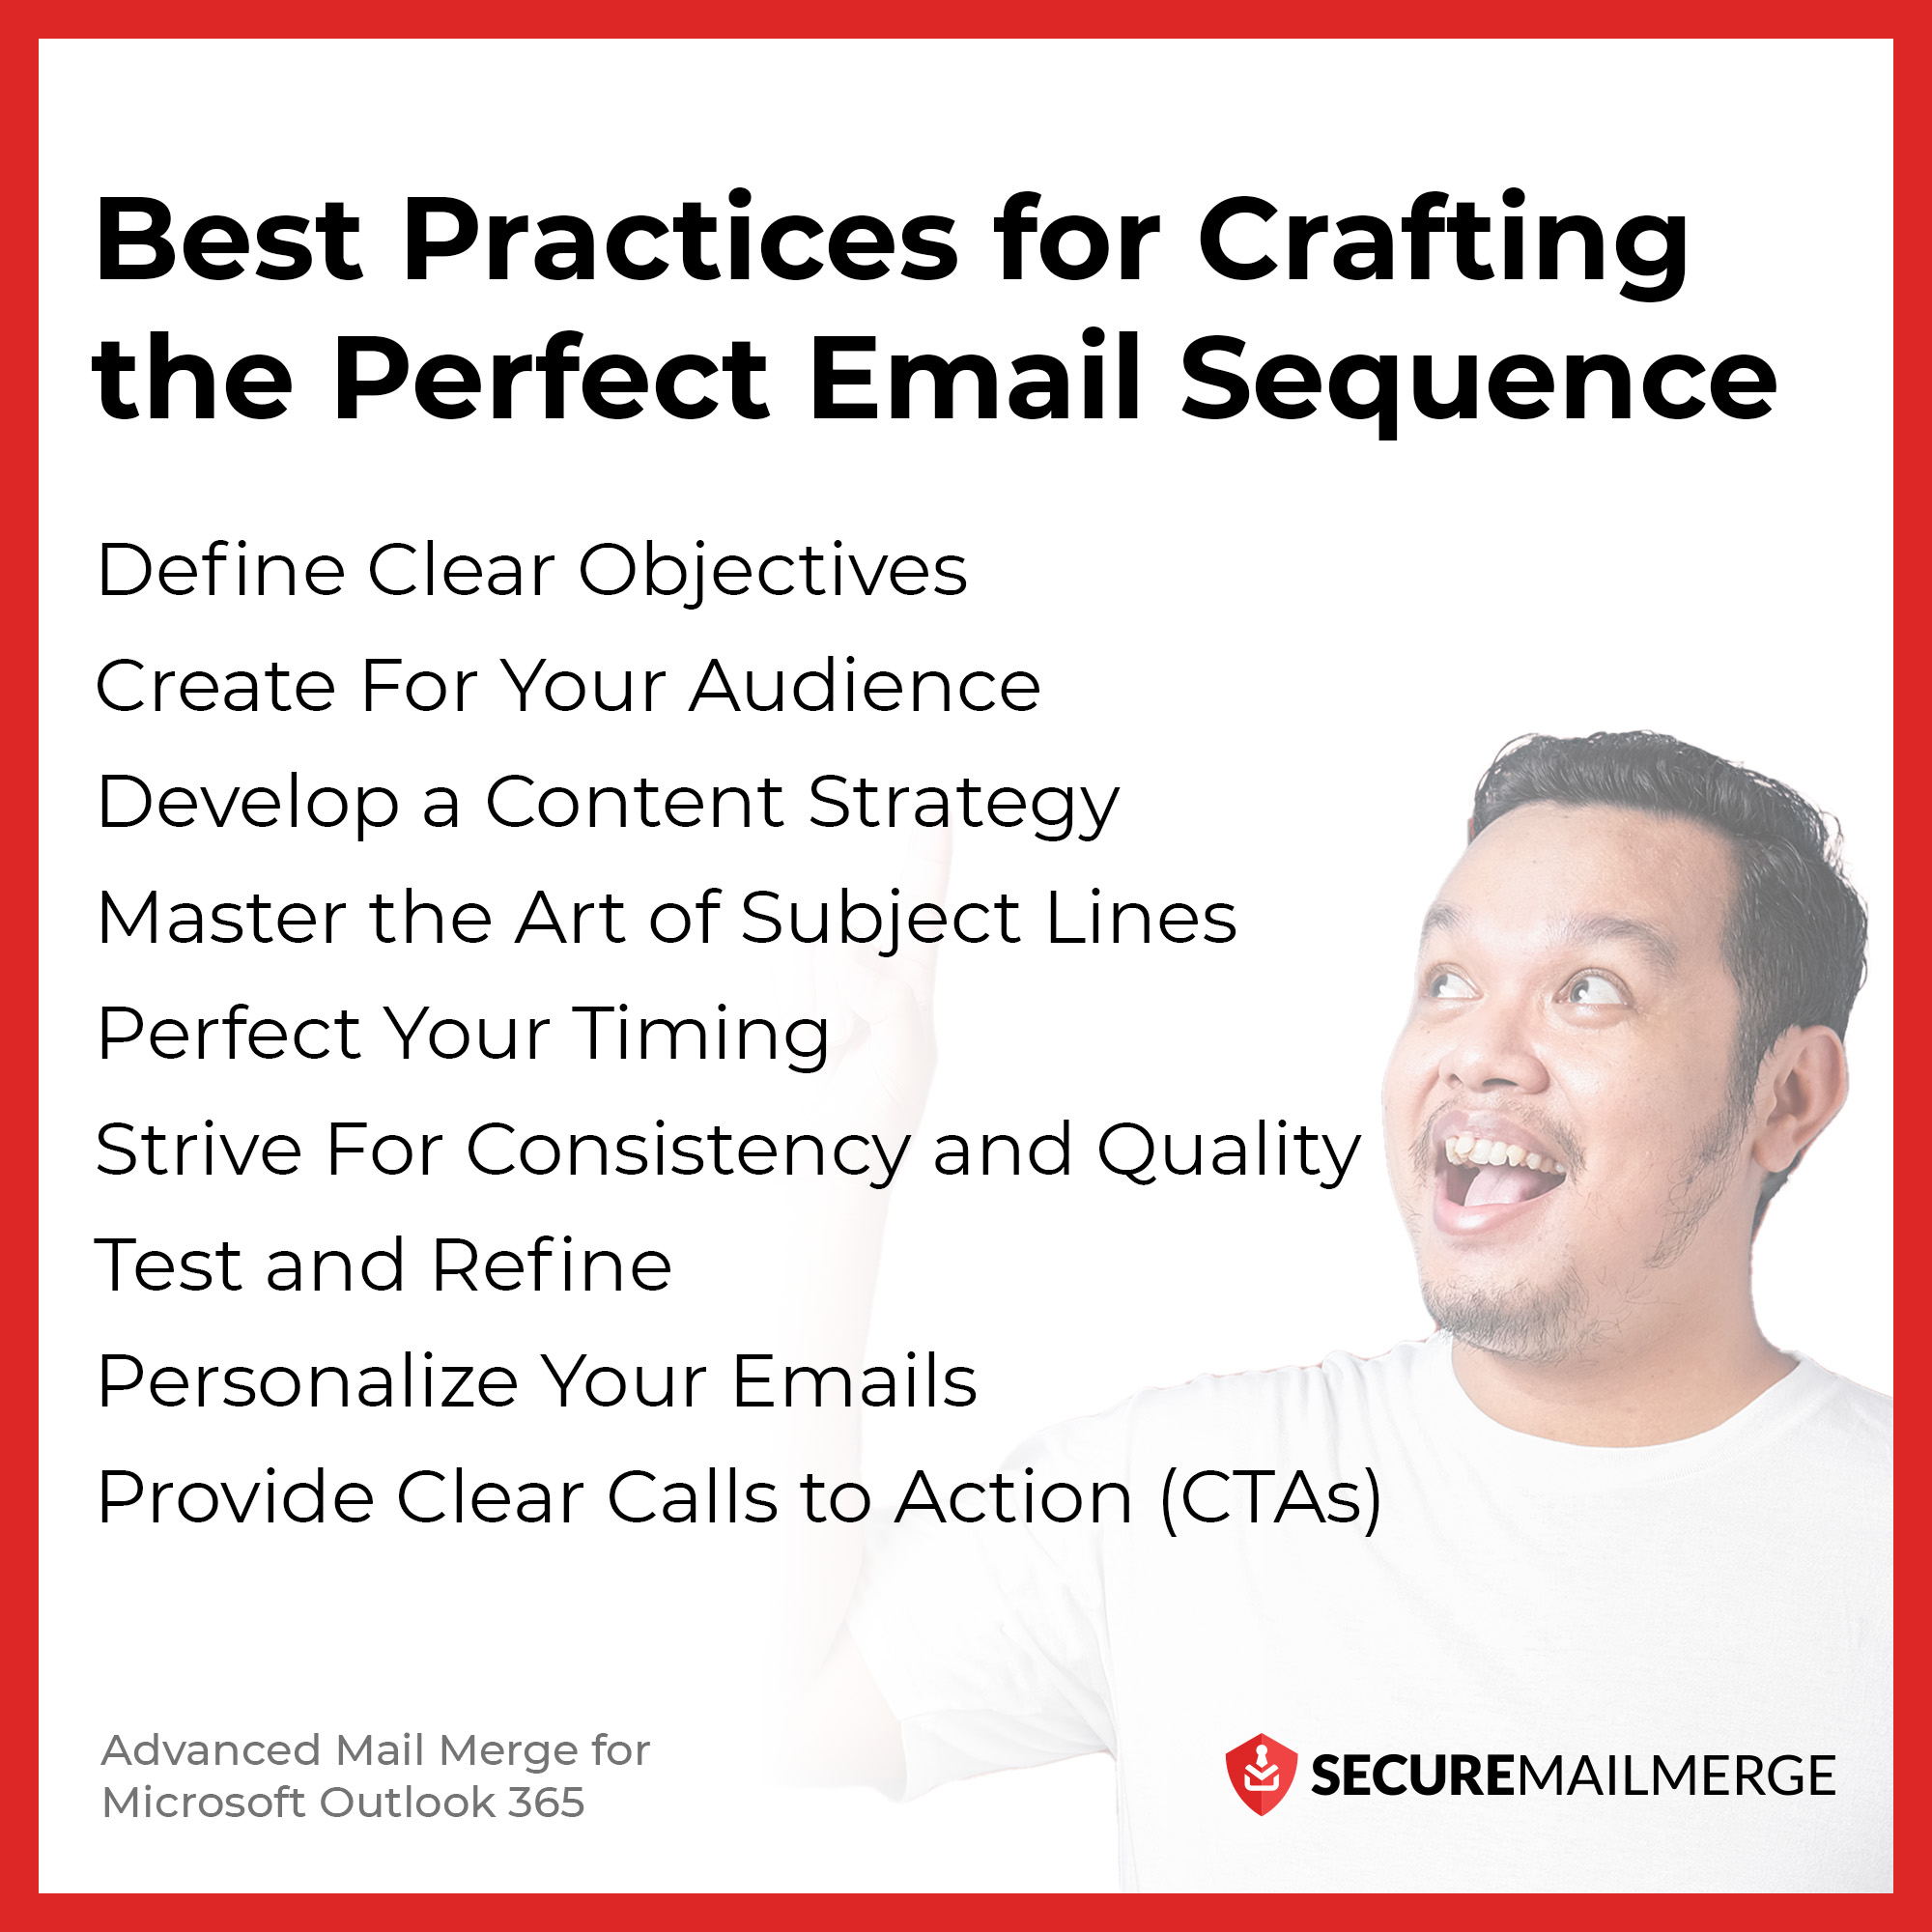 Best Practices for Crafting the Perfect Email Sequence